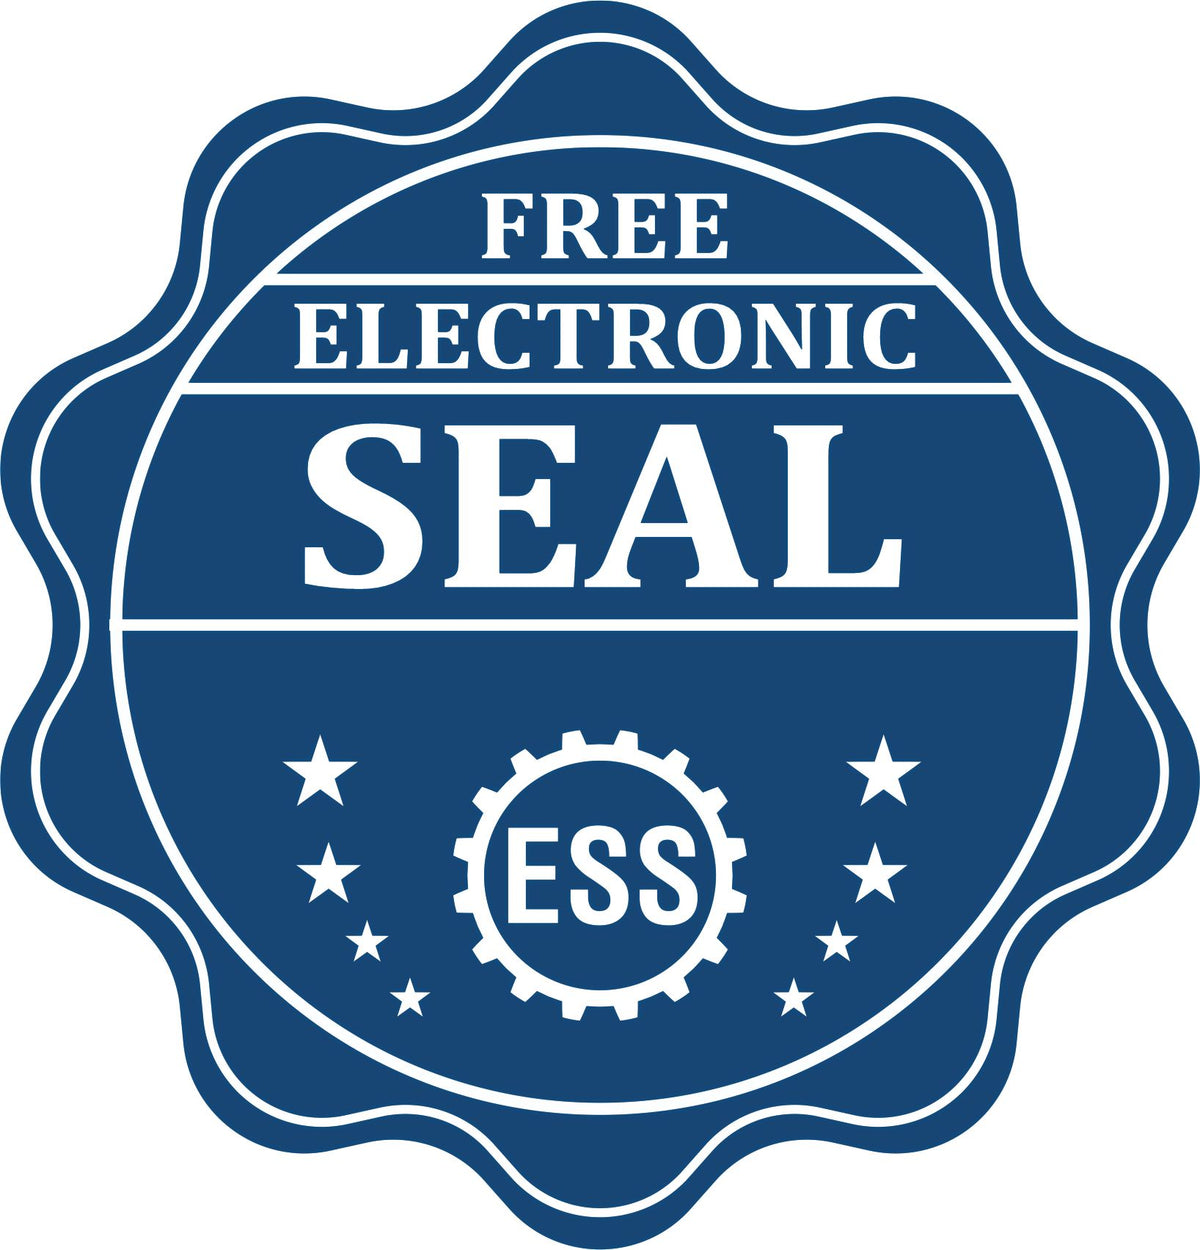 A badge showing a free electronic seal for the Slim Pre-Inked Mississippi Landscape Architect Seal Stamp with stars and the ESS gear on the emblem.